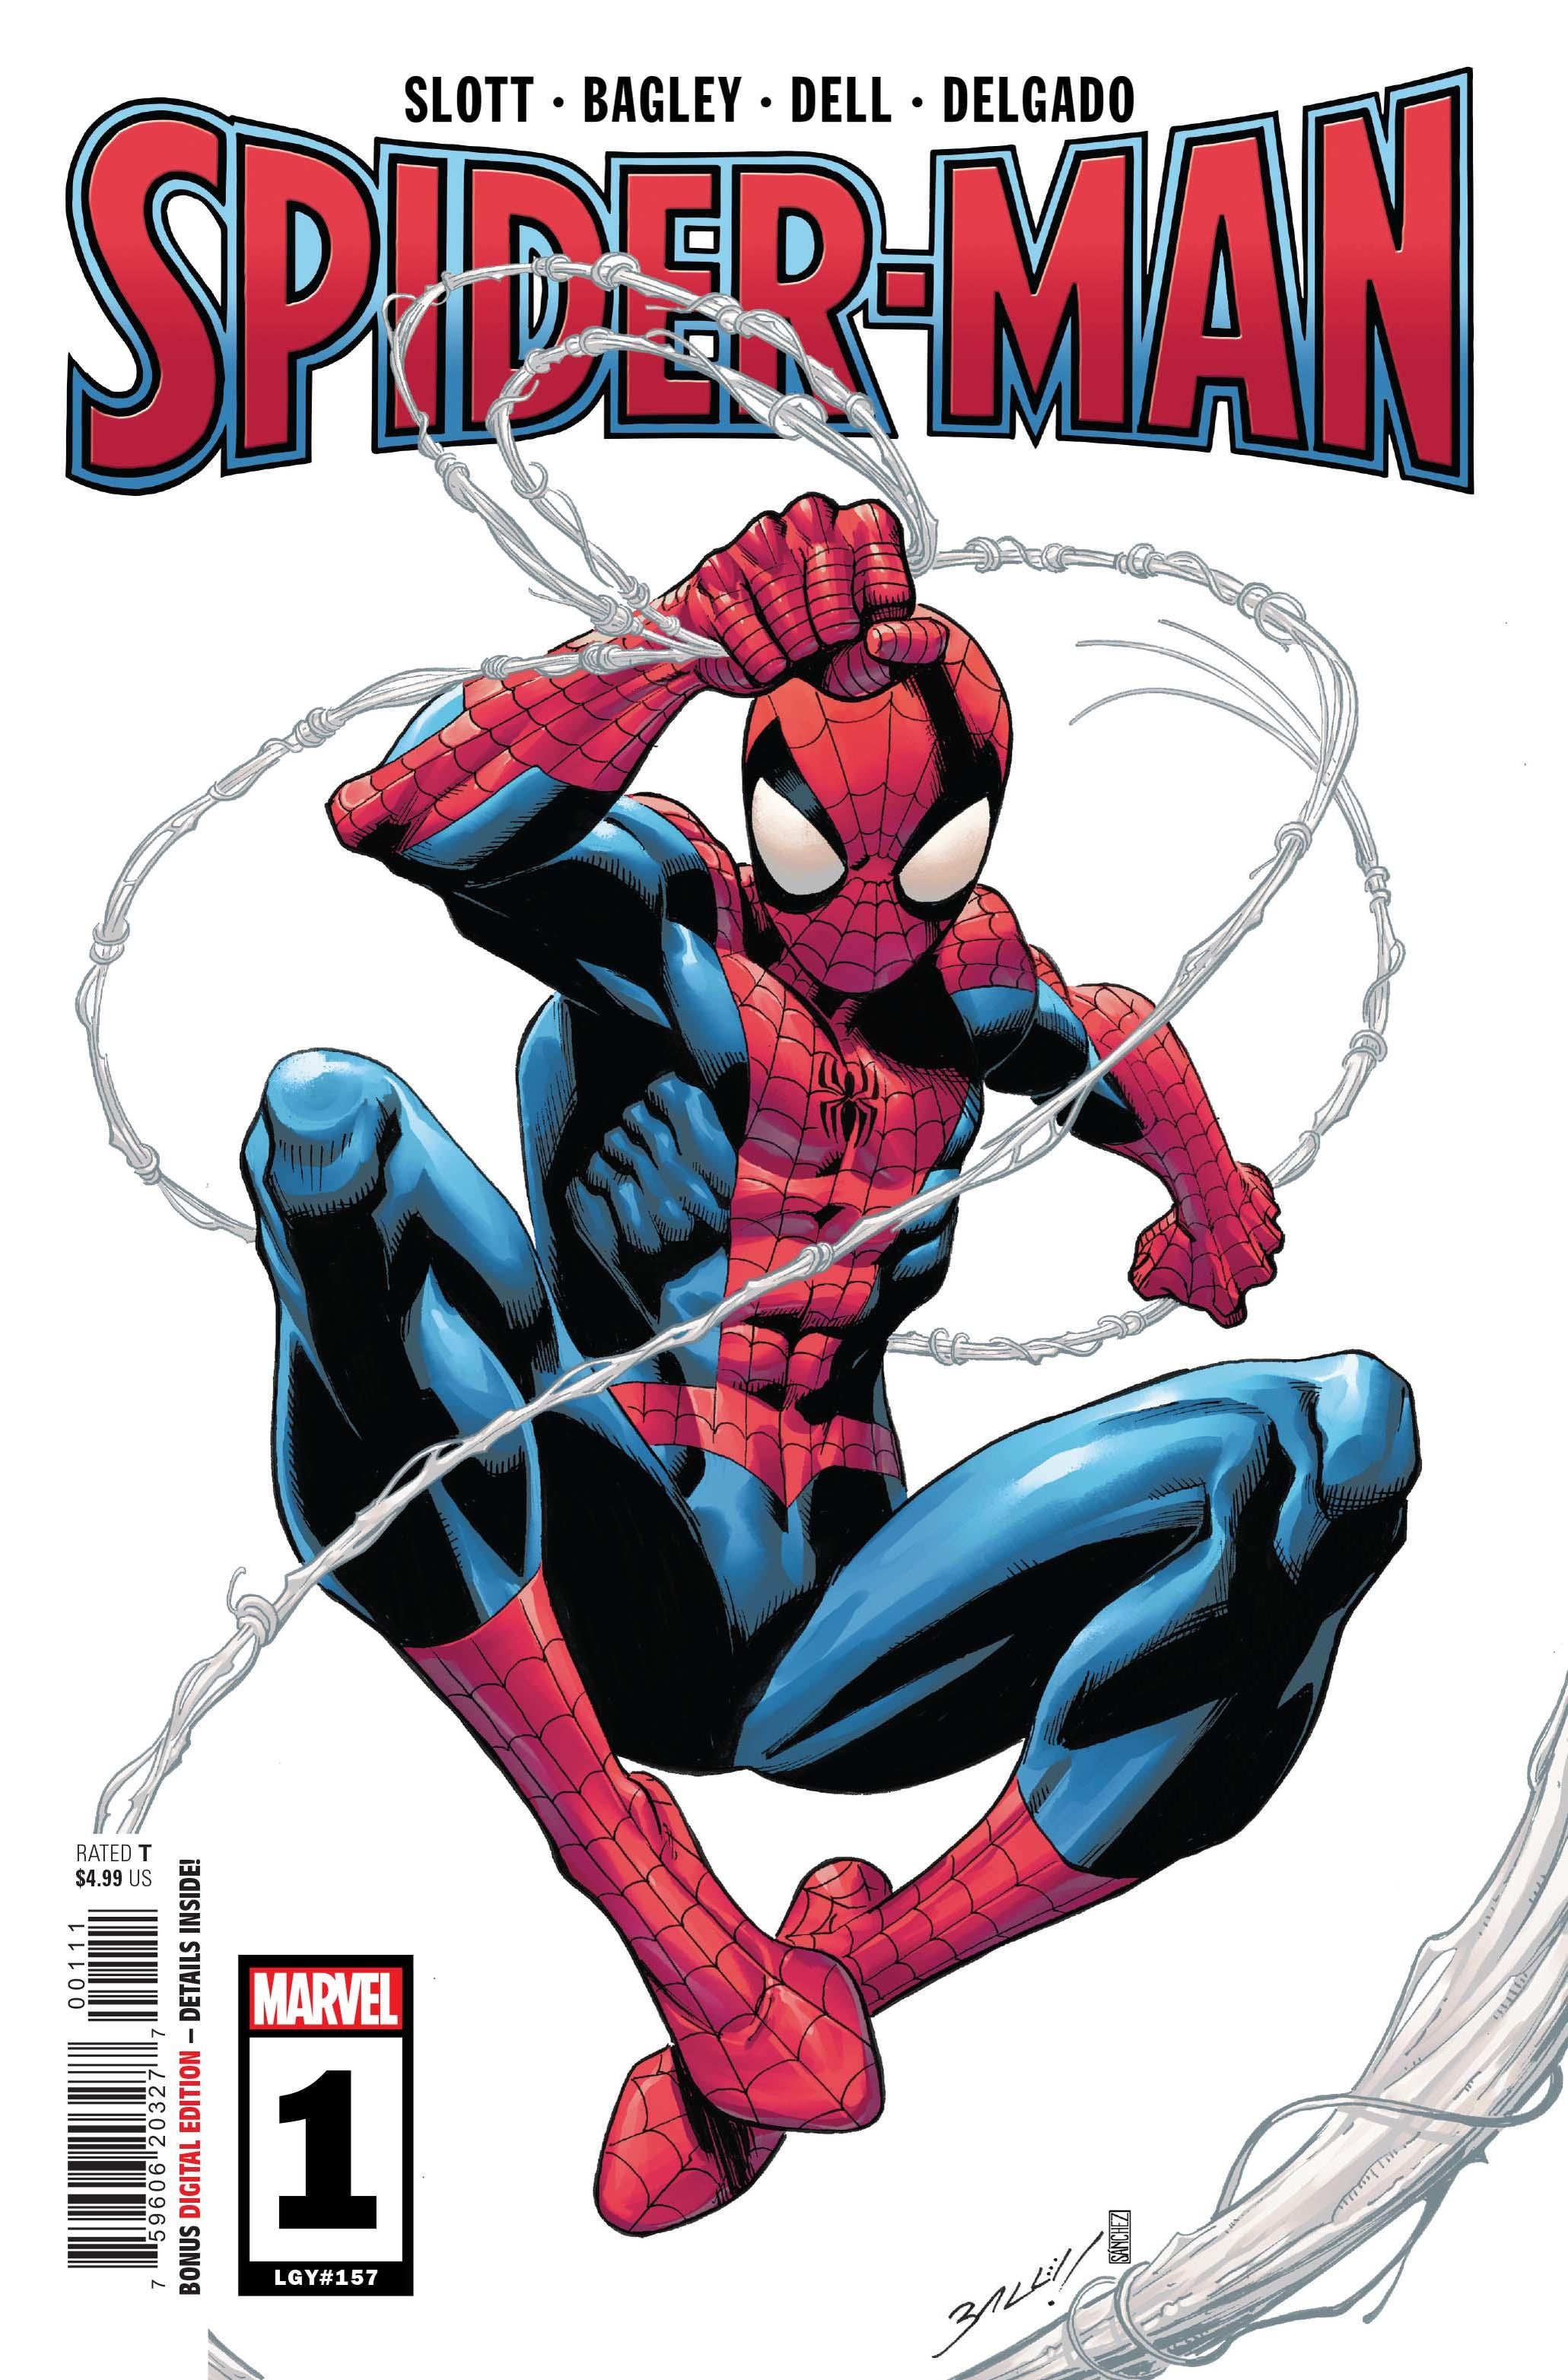 End of the Spider-Verse Begins #1 in Spider-Man Preview (Exclusive)